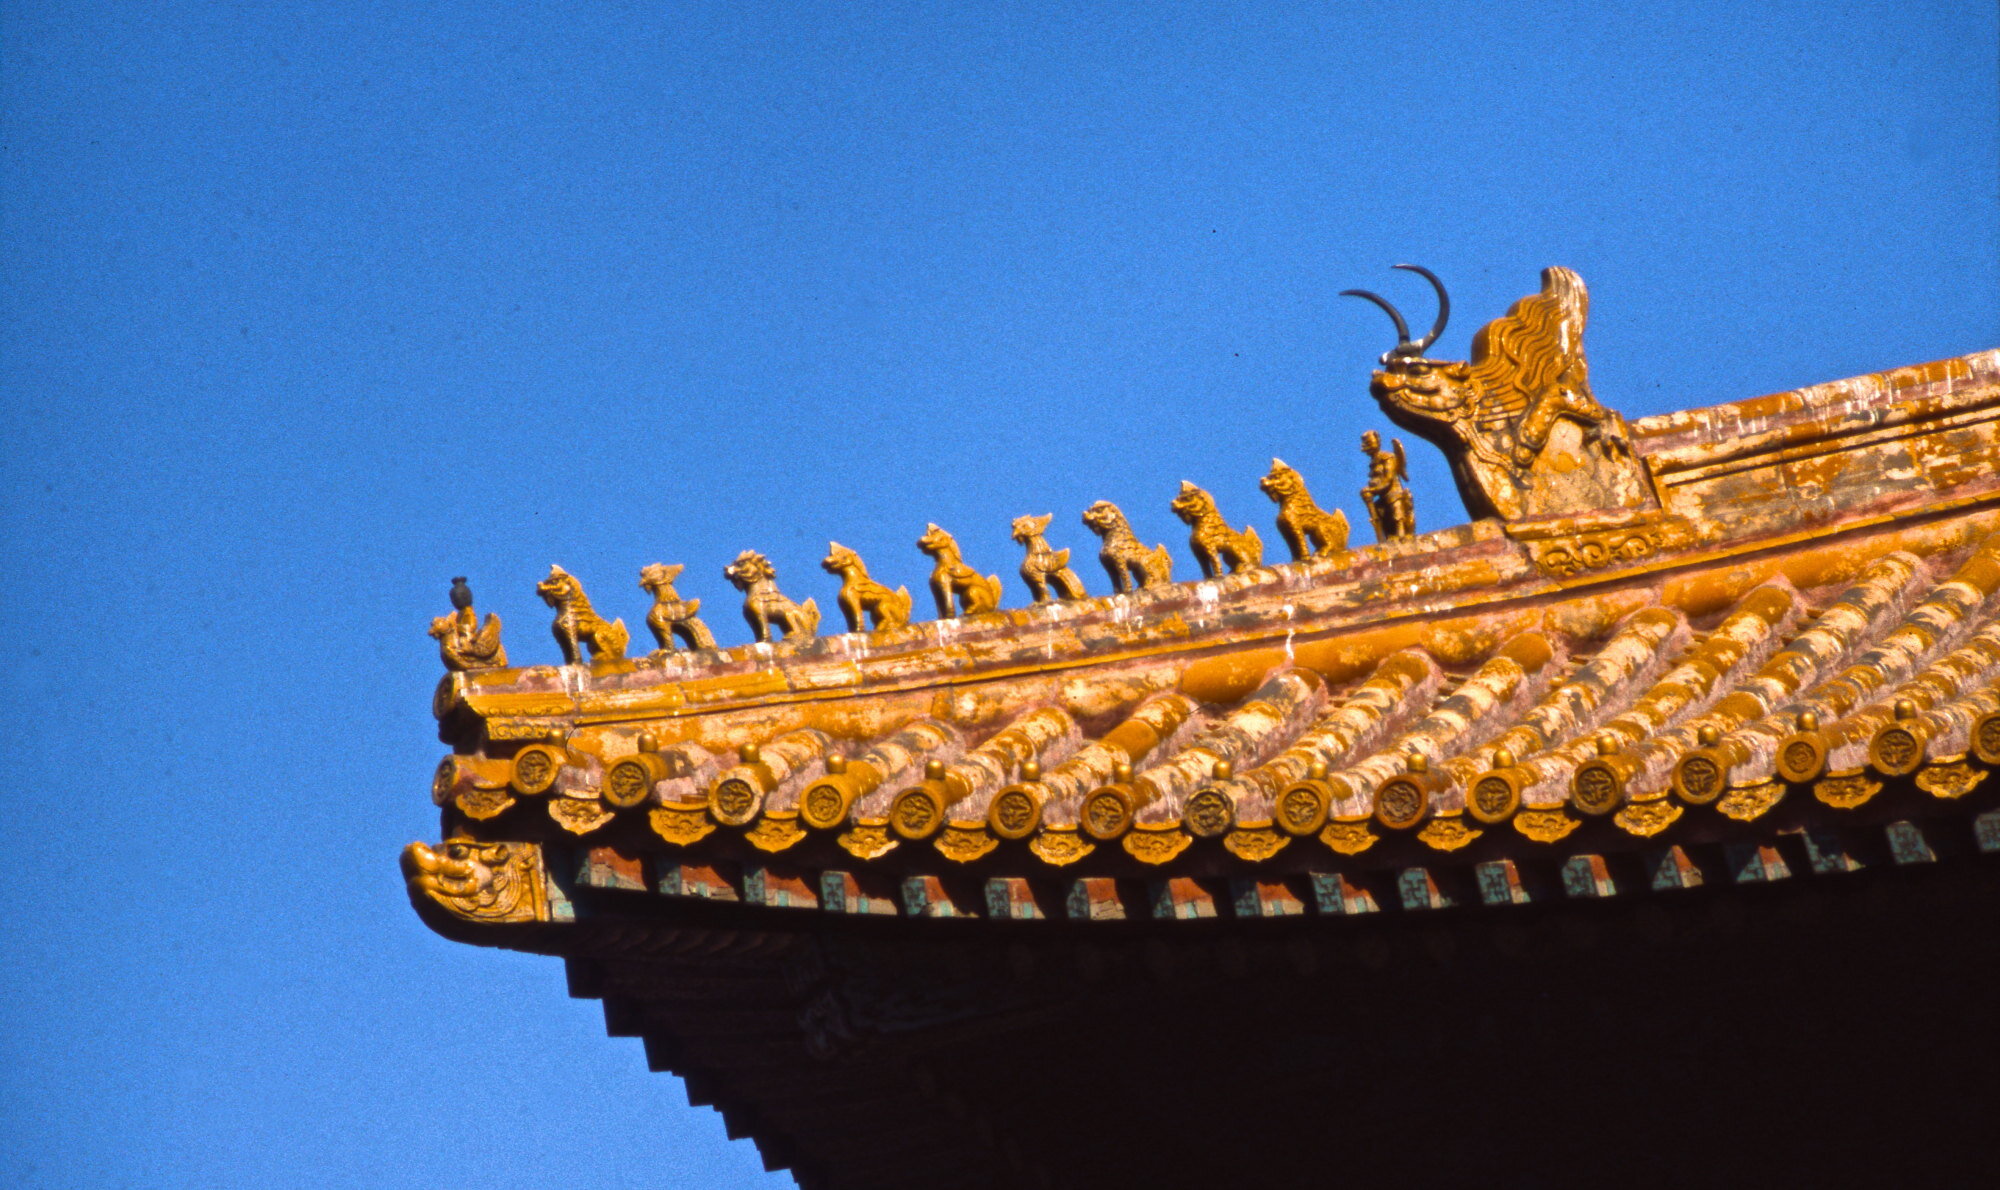 The Chinese Zodiac on a roof in the Forbidden City in Beijing, China.